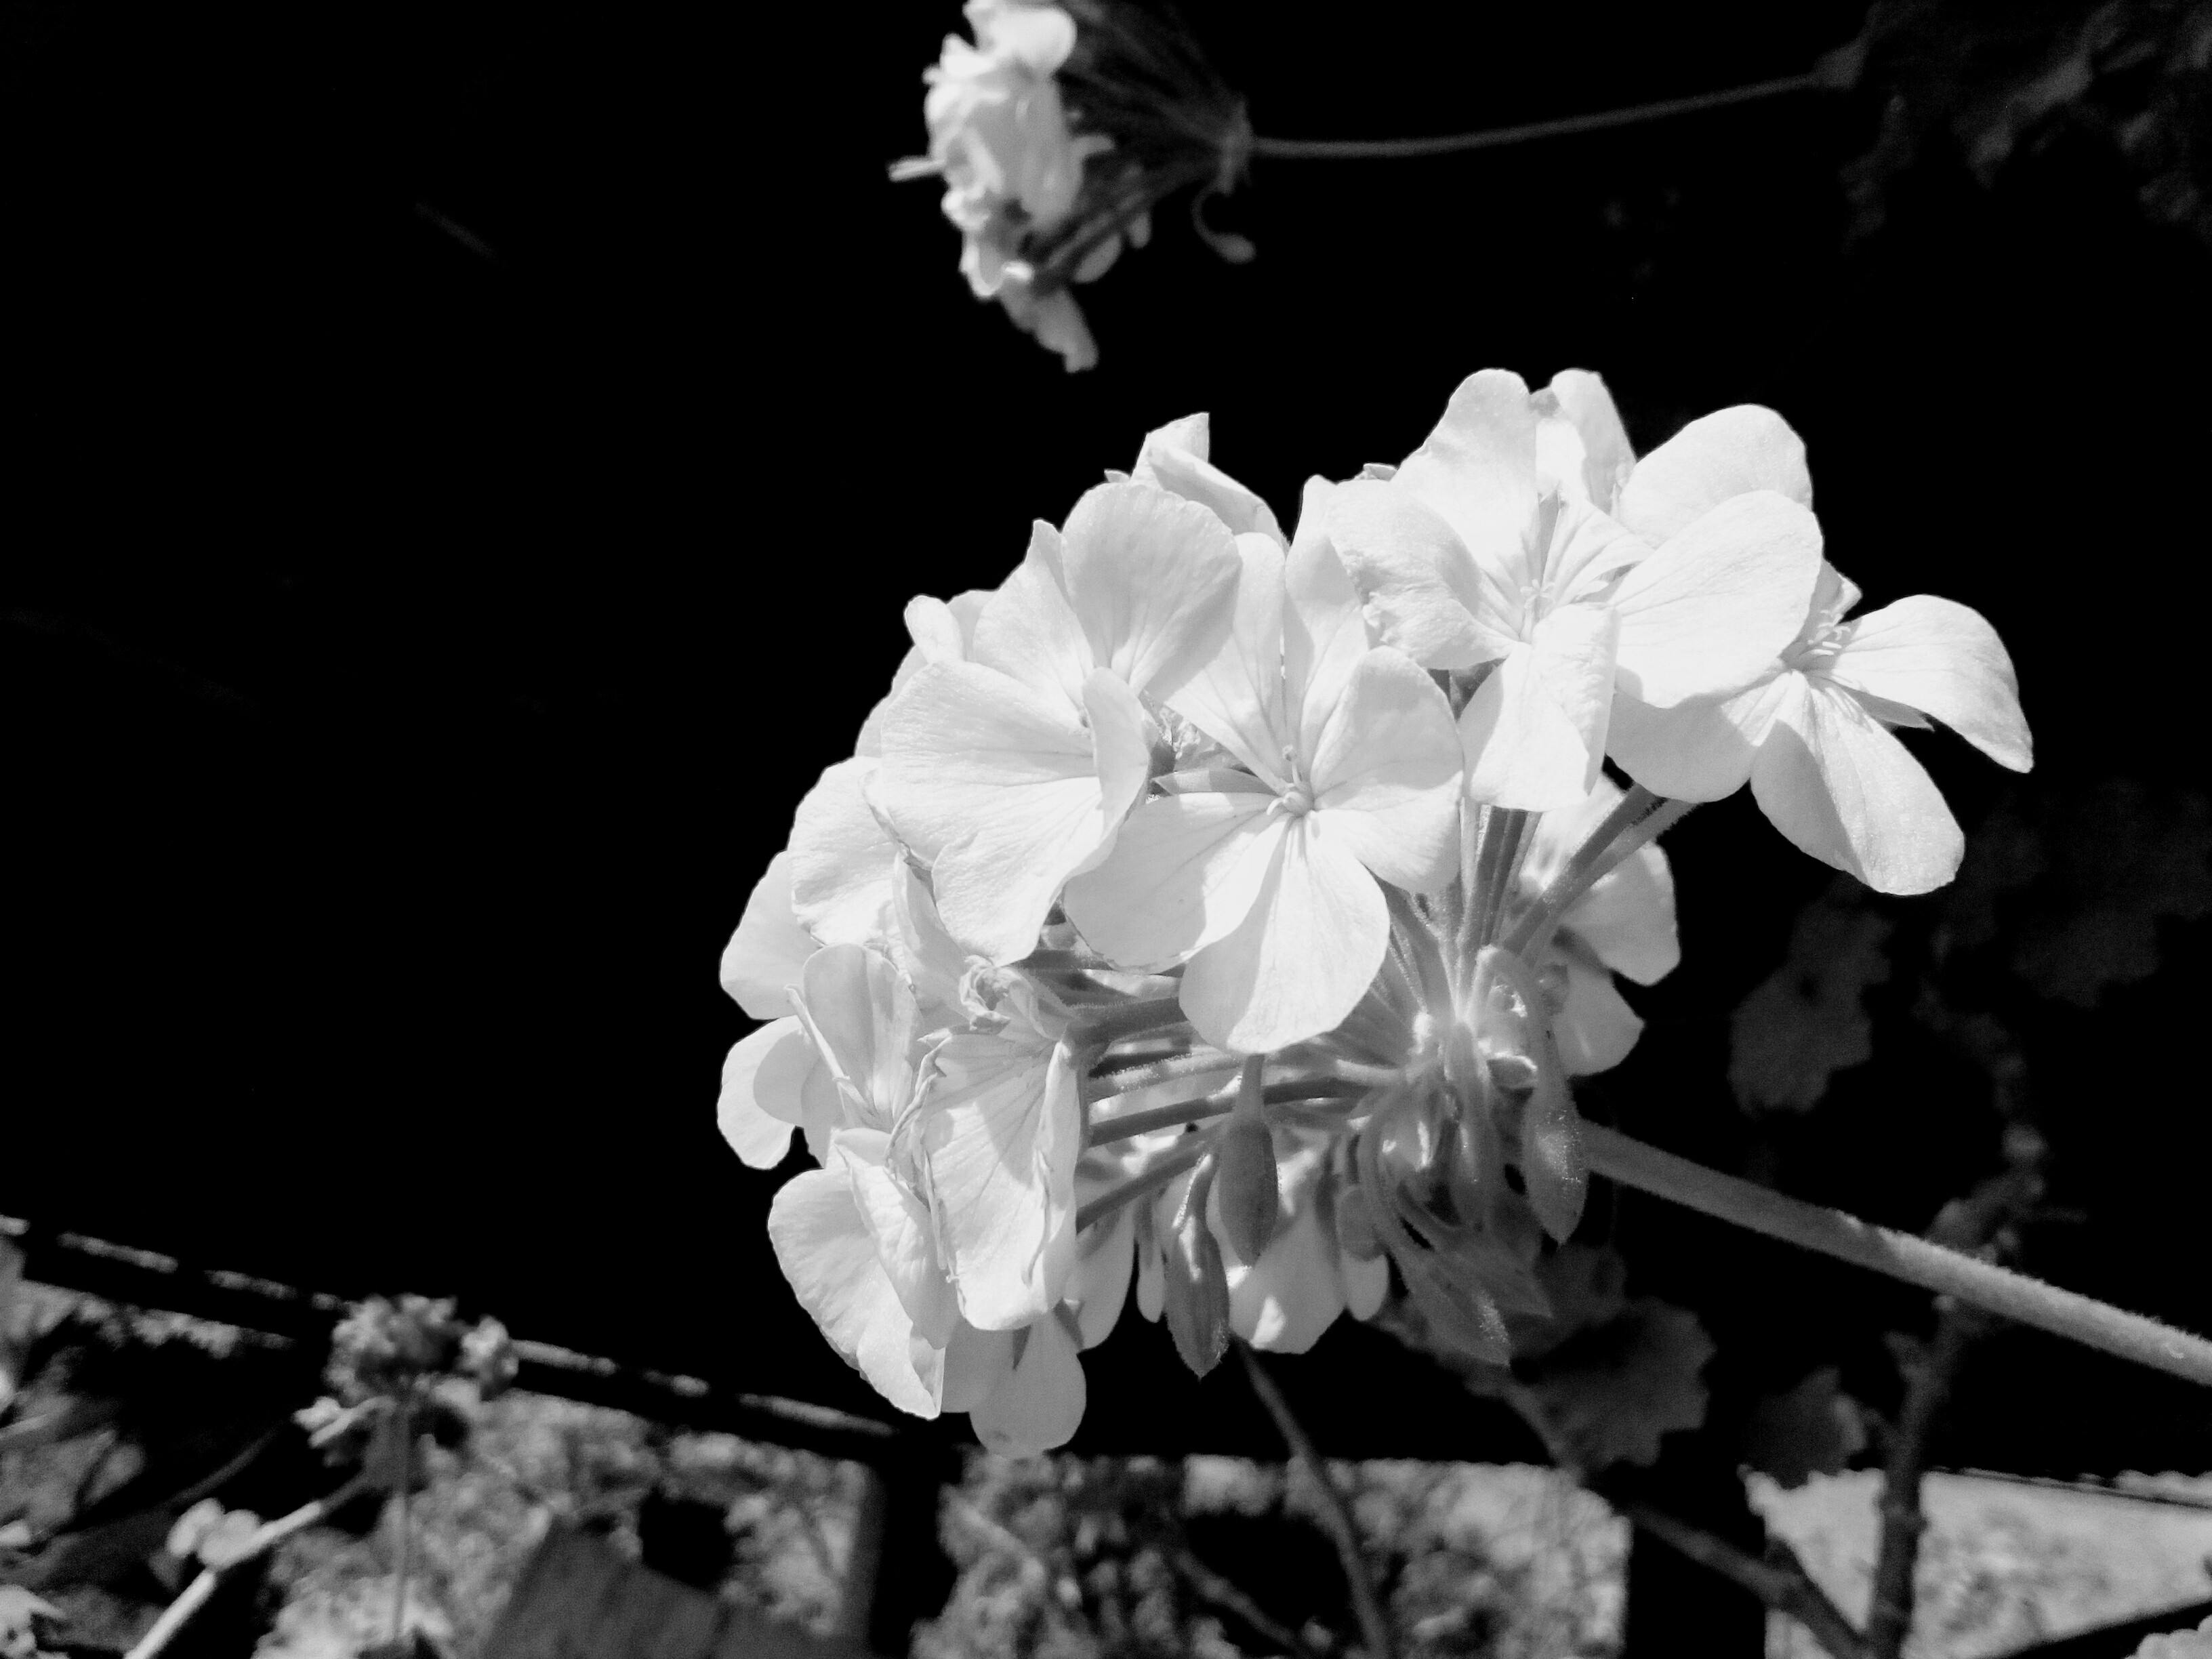 Free stock photo of Black and white flower